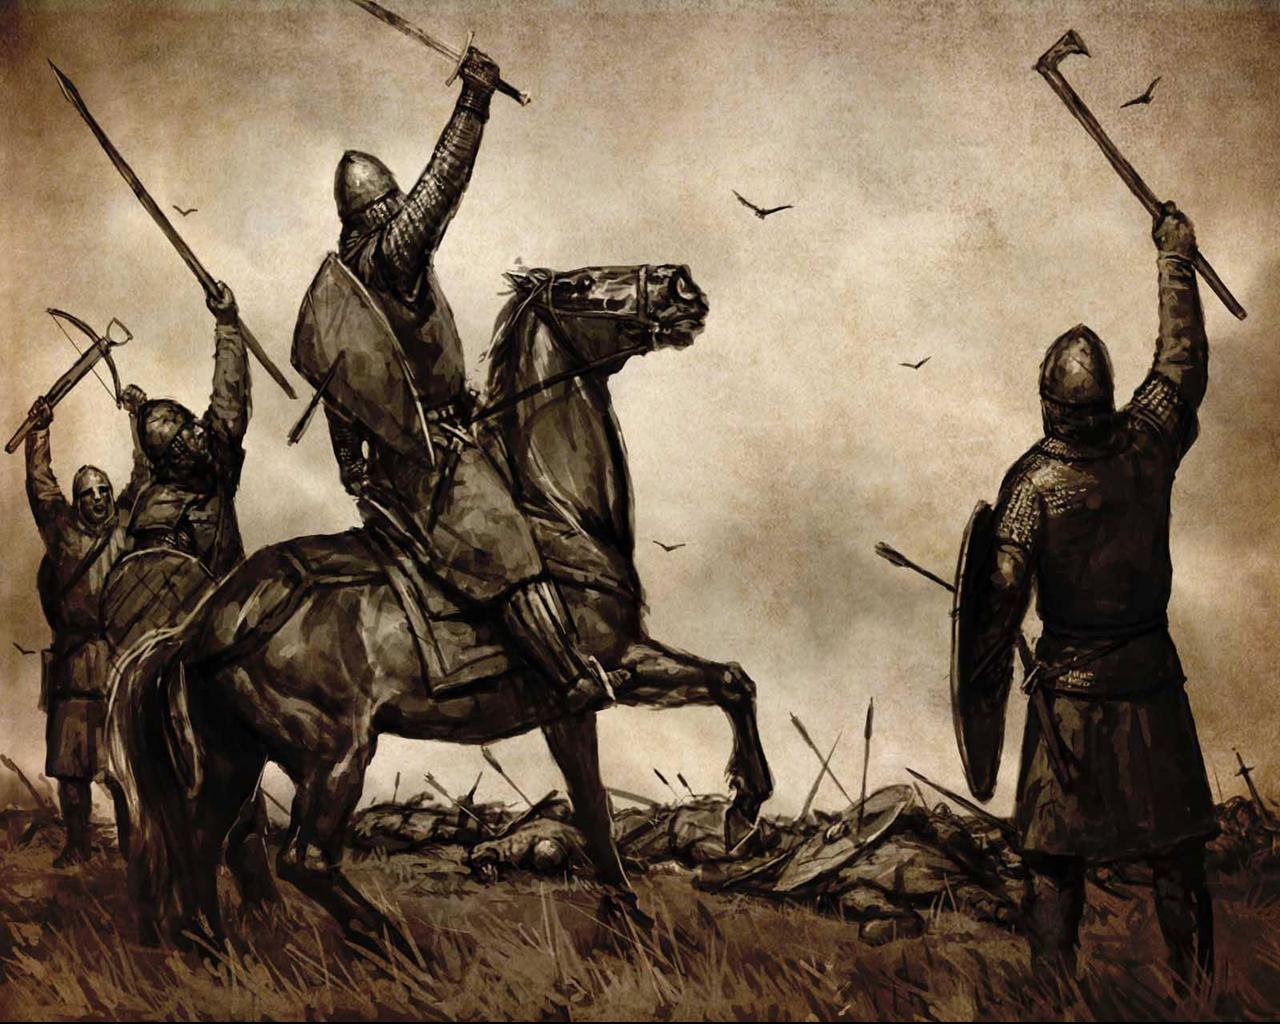 Mount & Blade Picture